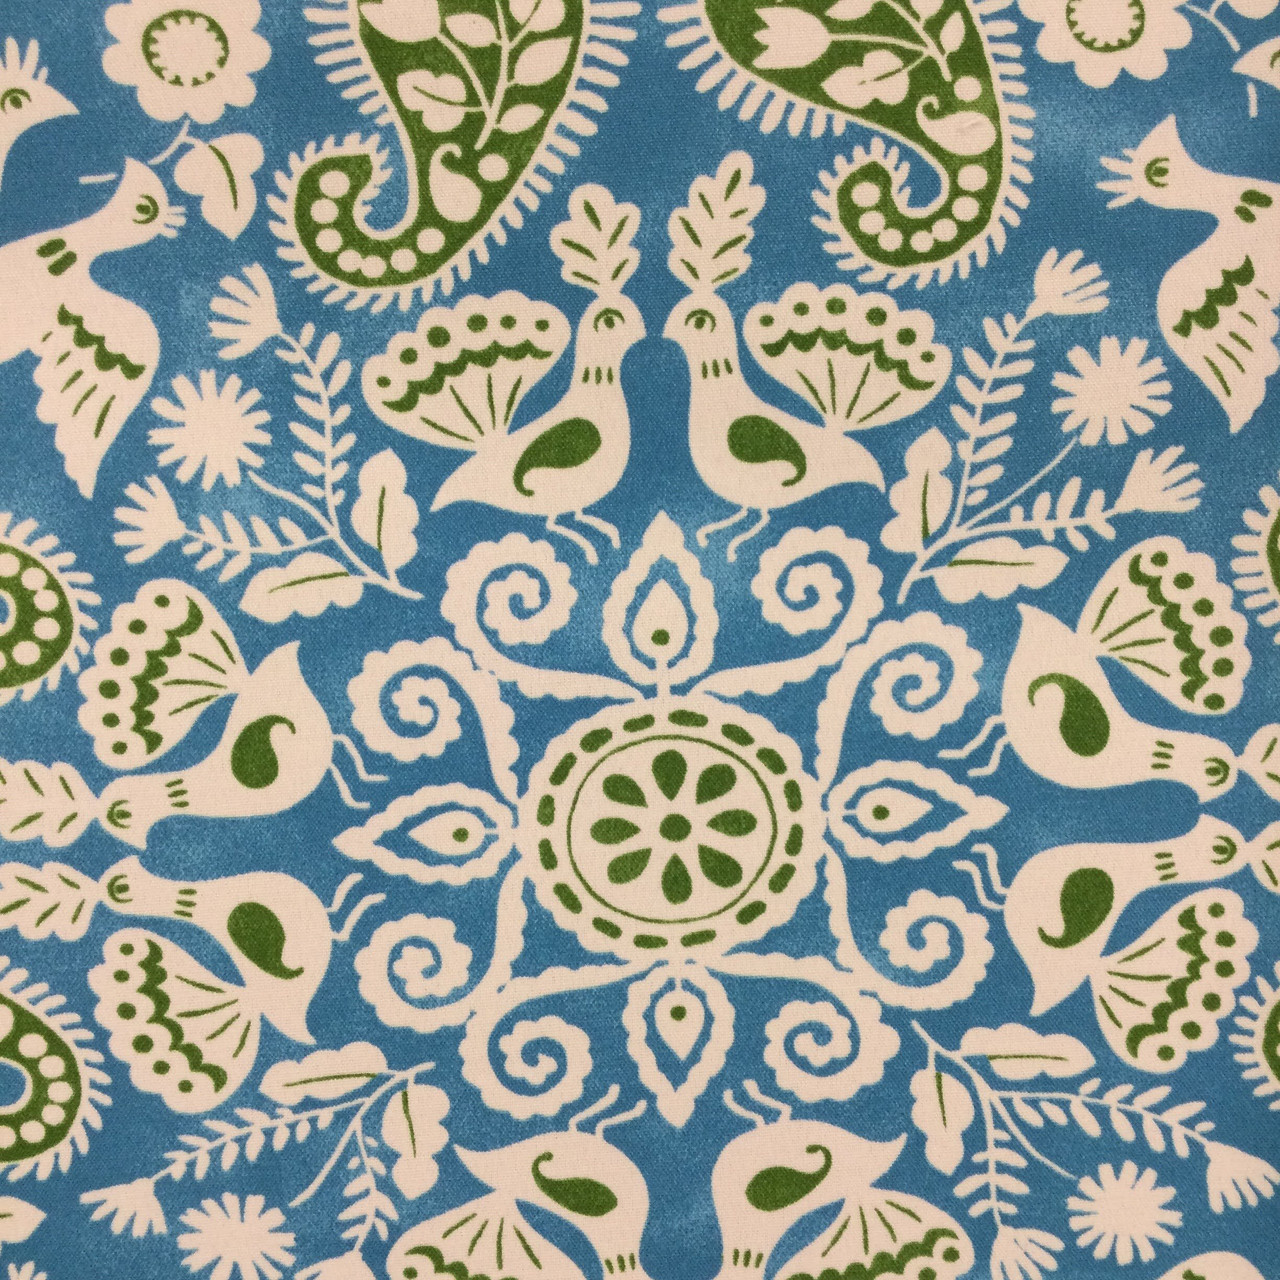 Paisley Floral with Birds in Turquoise Green, and Off White ...